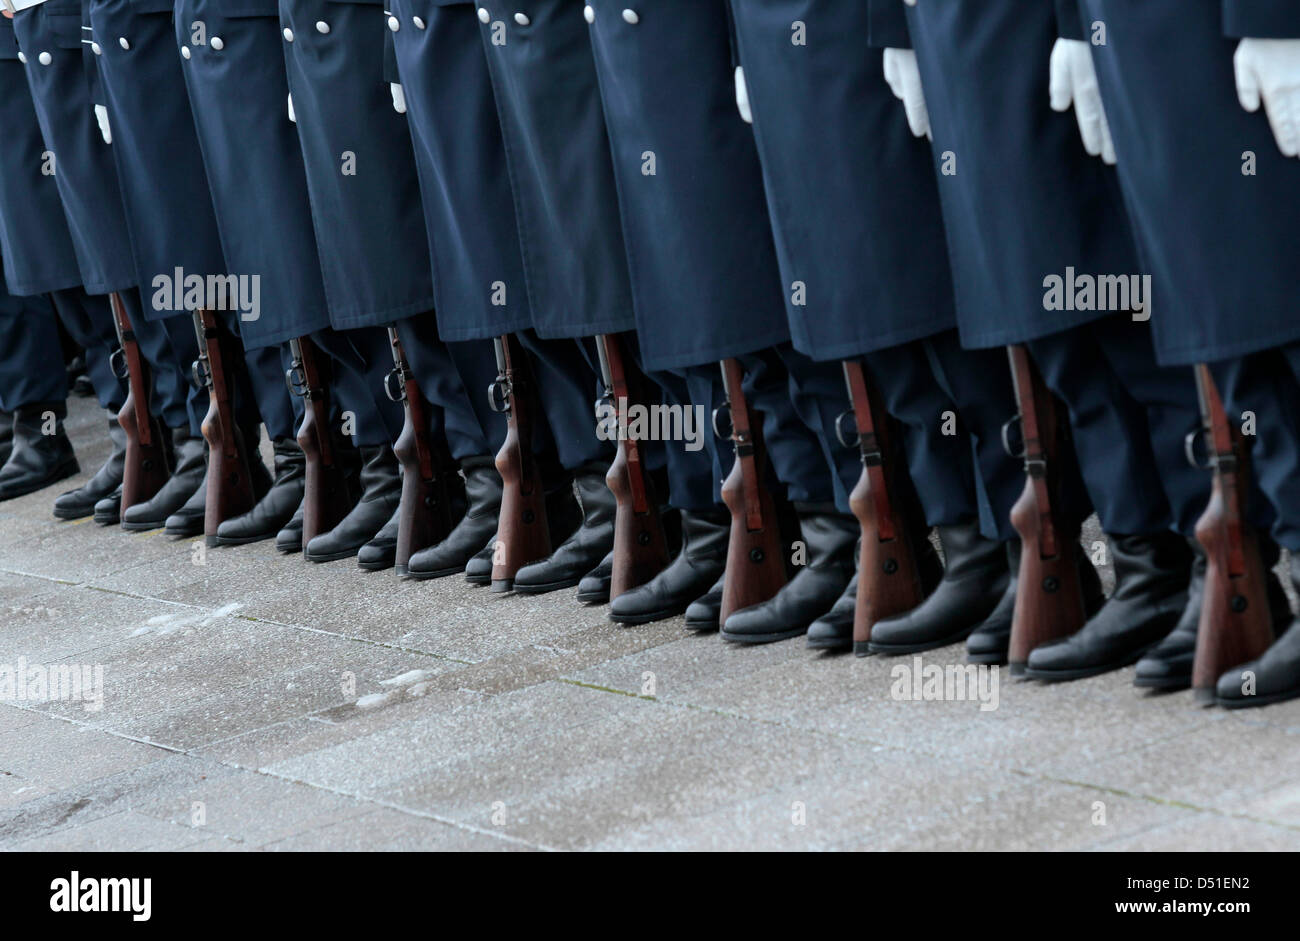 Soldiers stand during the reception ceremony for the Hungarian Defence Minister Csaba Hende in Berlin, Germany, 7 December 2010. The meeting will focus on the current state of military policies and bilateral topics. Photo: Marcel Mettelsiefen Stock Photo